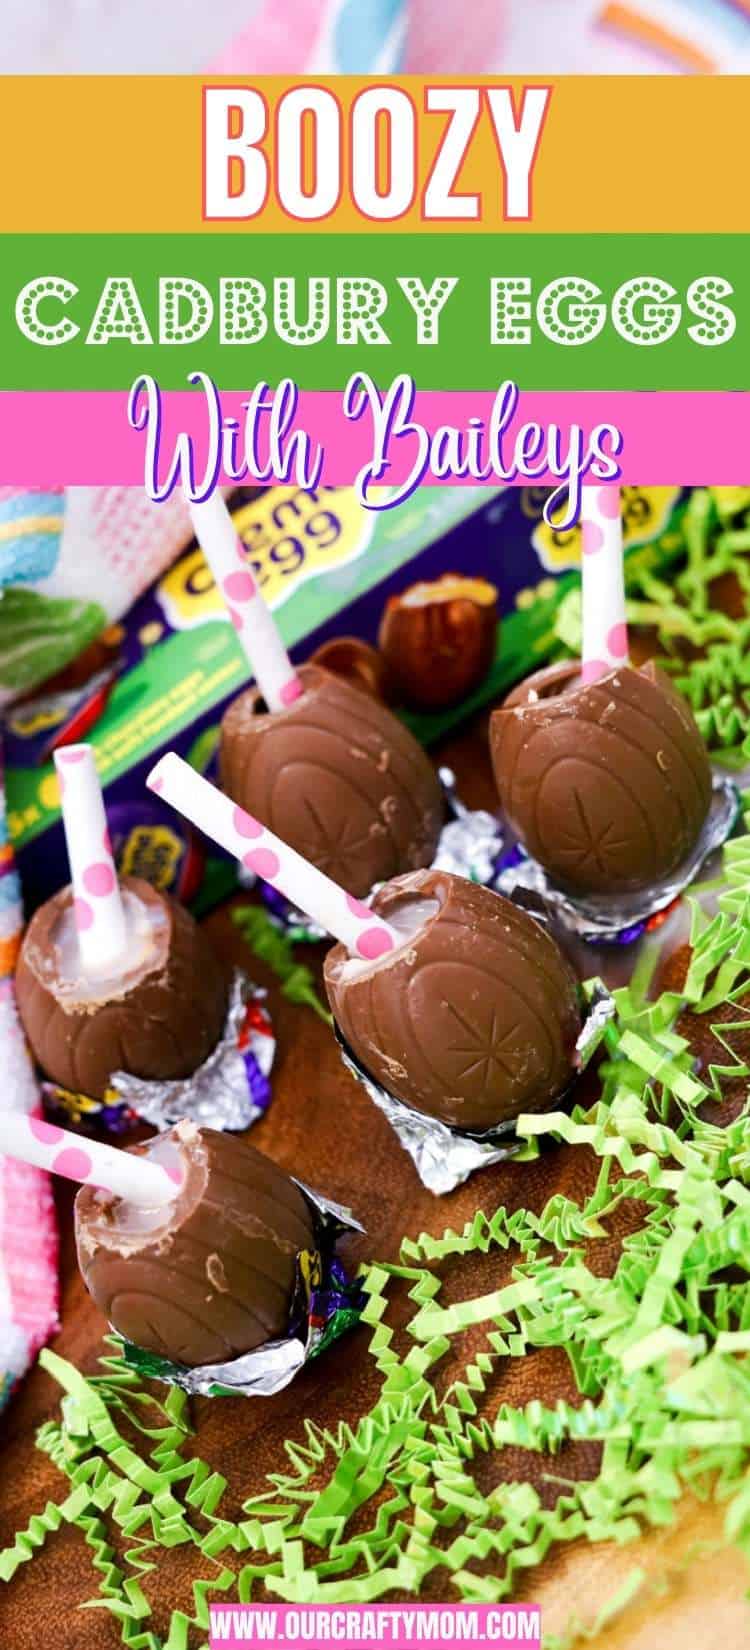 boozy cadbury eggs shot pin collage with text